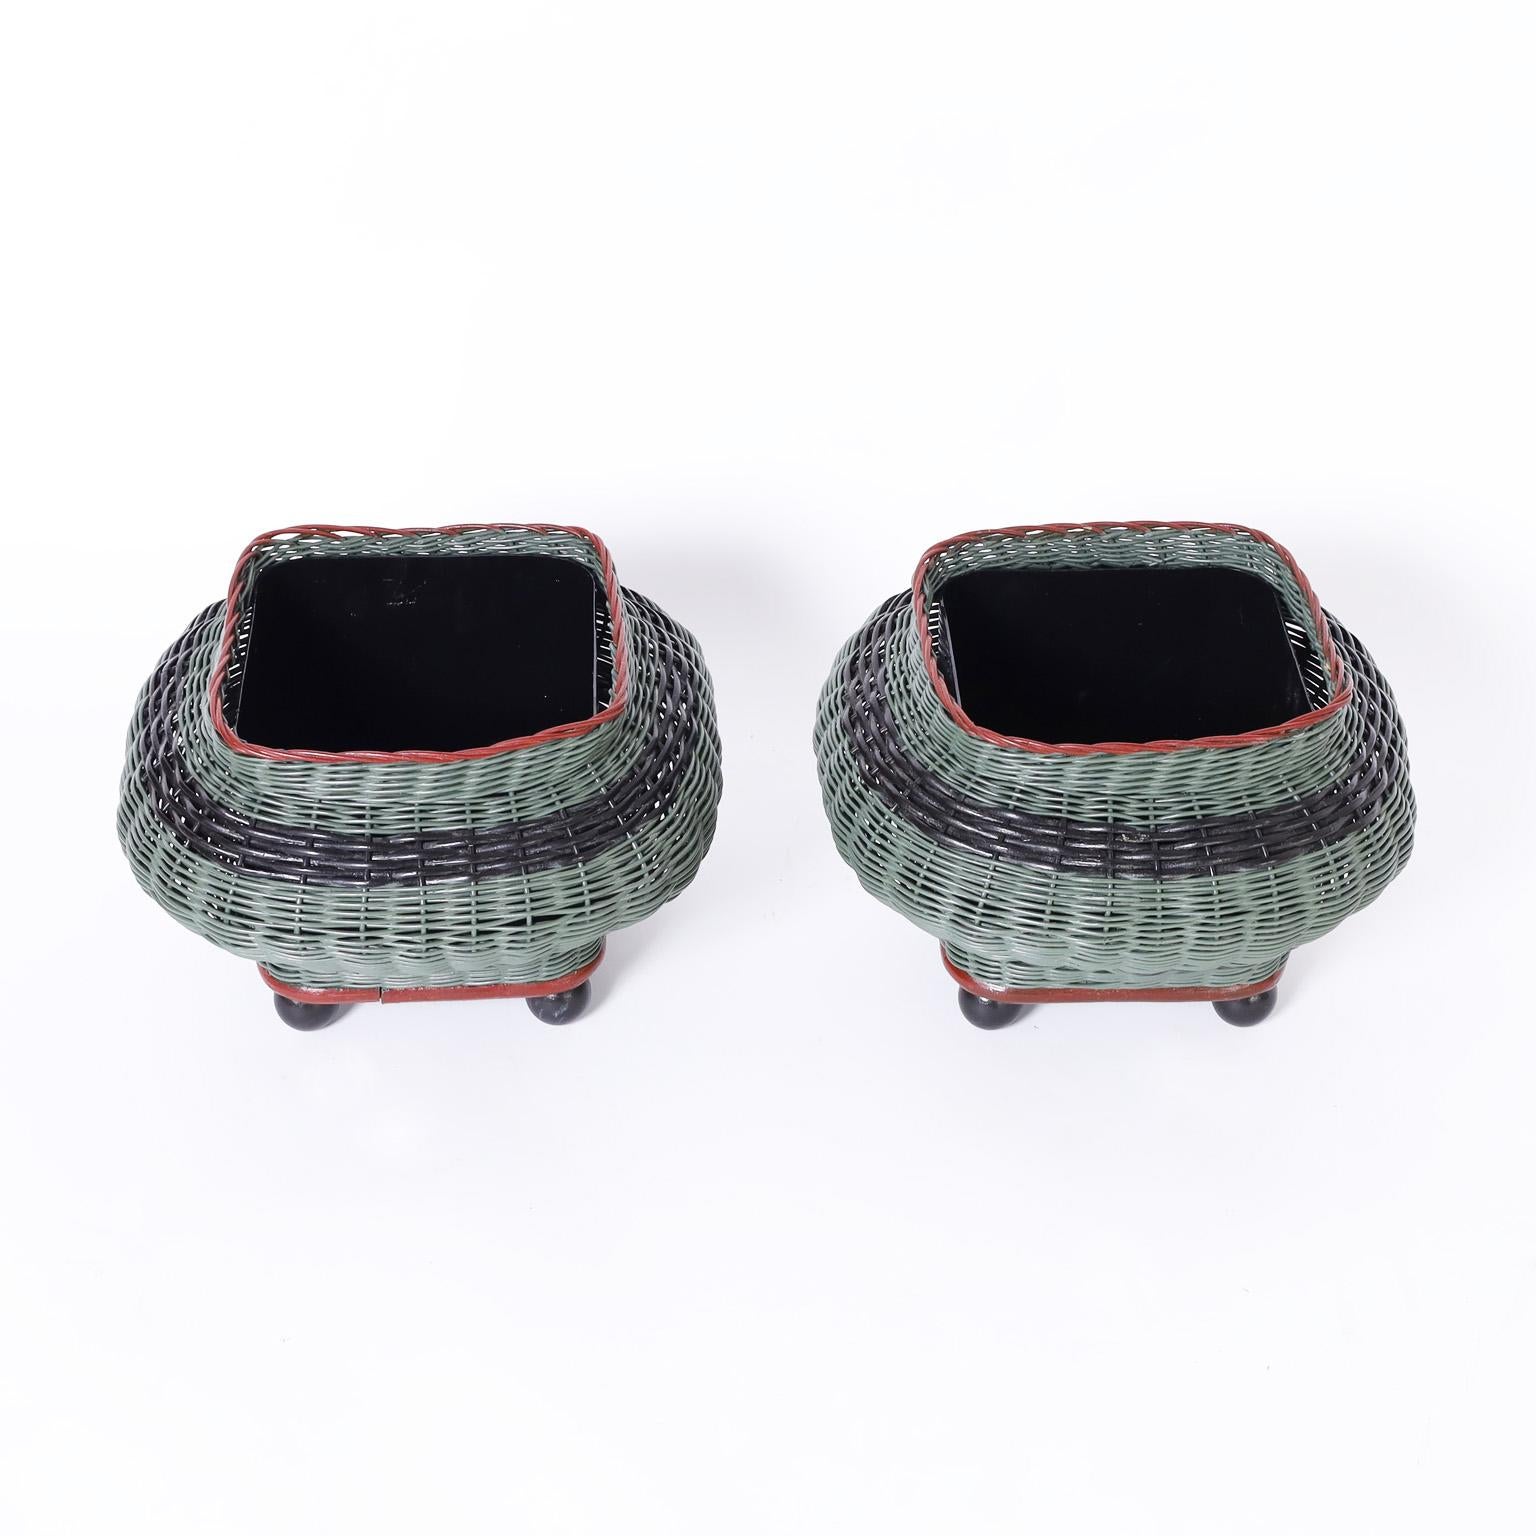 Unusual pair of vintage planters crafted in stick wicker in a Bombay form painted and raised on classic ball feet.